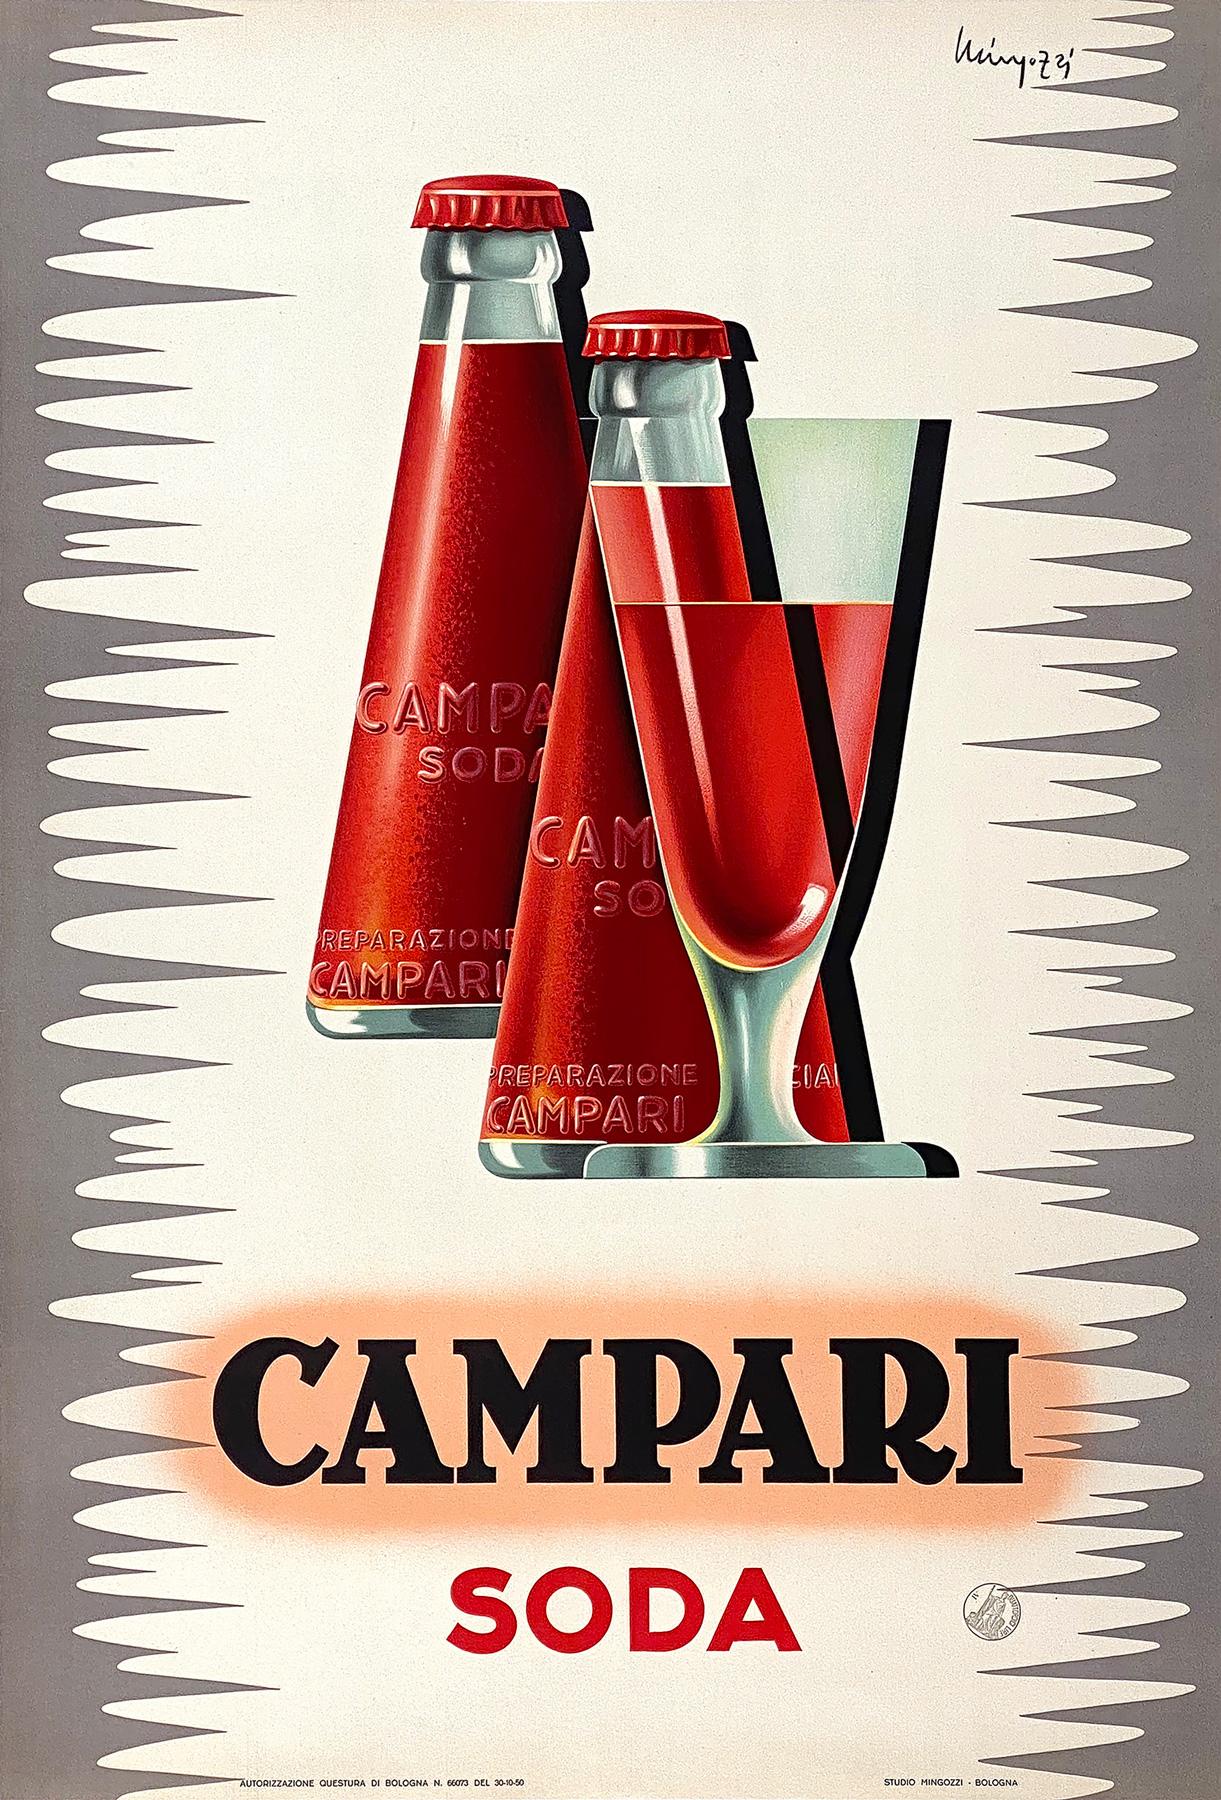 Stunning original 1950s Italian alcohol advertising poster for Campari Soda featuring a wonderful design by Giovanni Mingozzi

Founded in Milan in 1860 by Gaspare Campari. By 1920, the first of the iconic Campari cocktails were invented and the